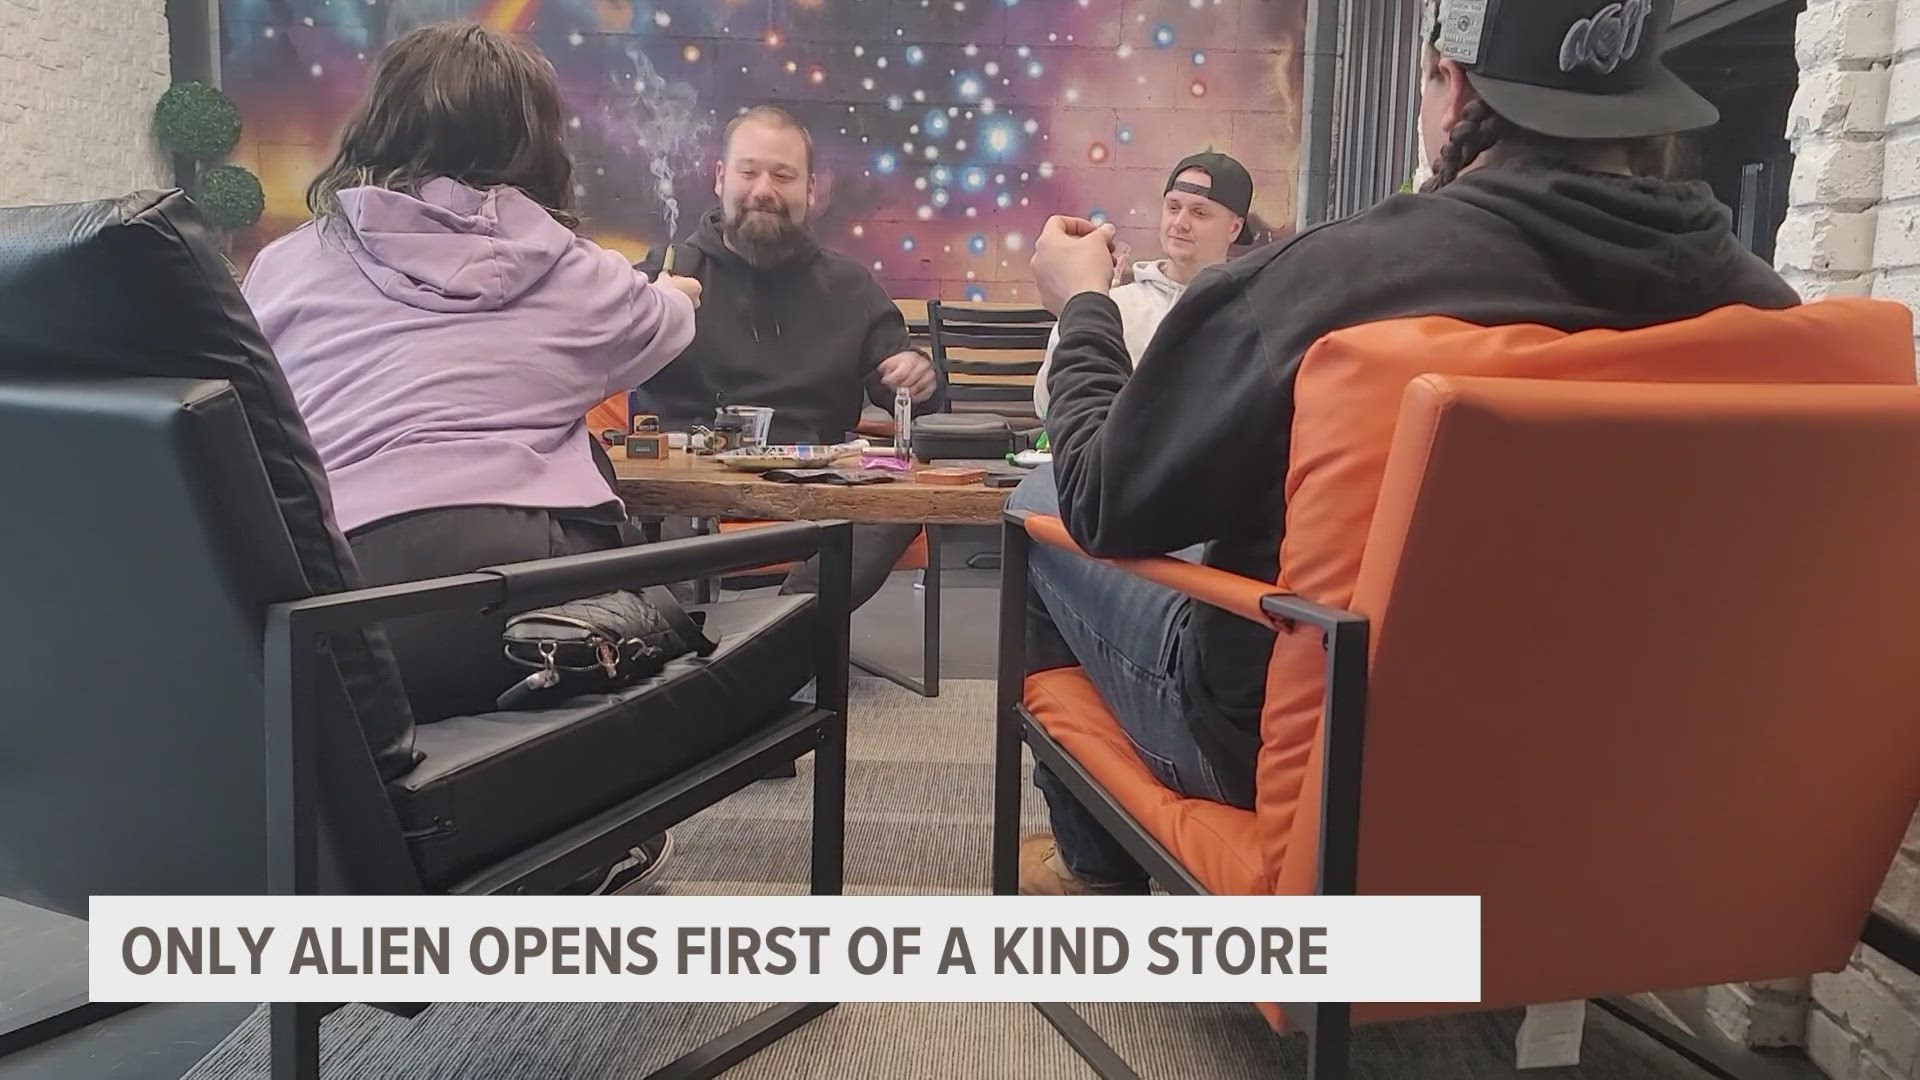 A brand new marijuana business is the first of its kind in West Michigan.